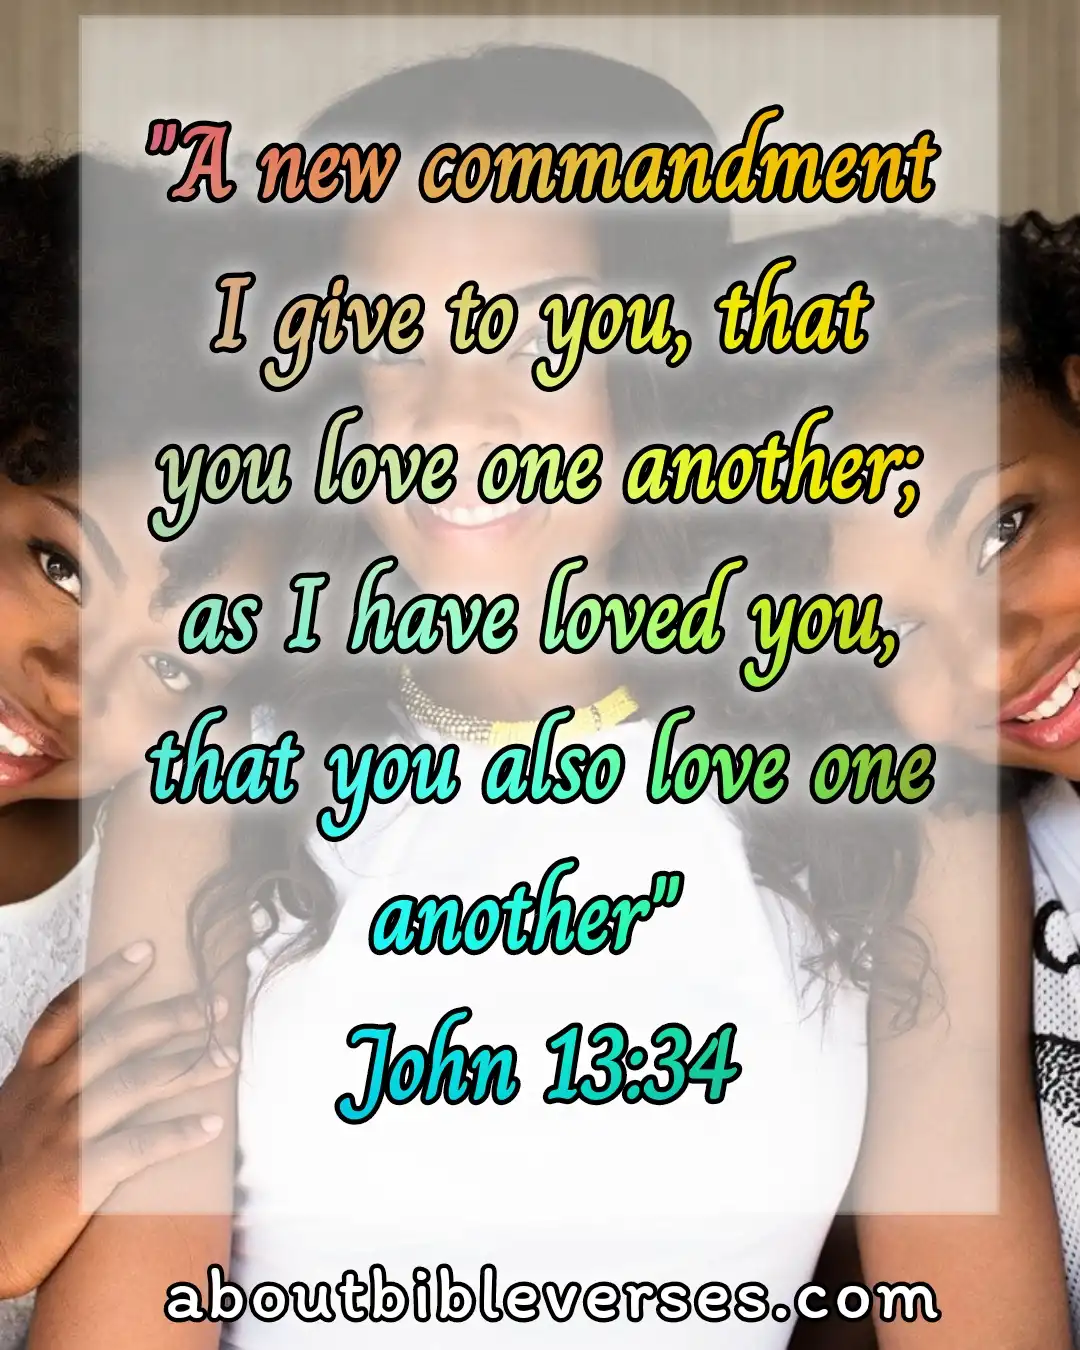 Bible Verses About Healthy Relationships (John 13:34)